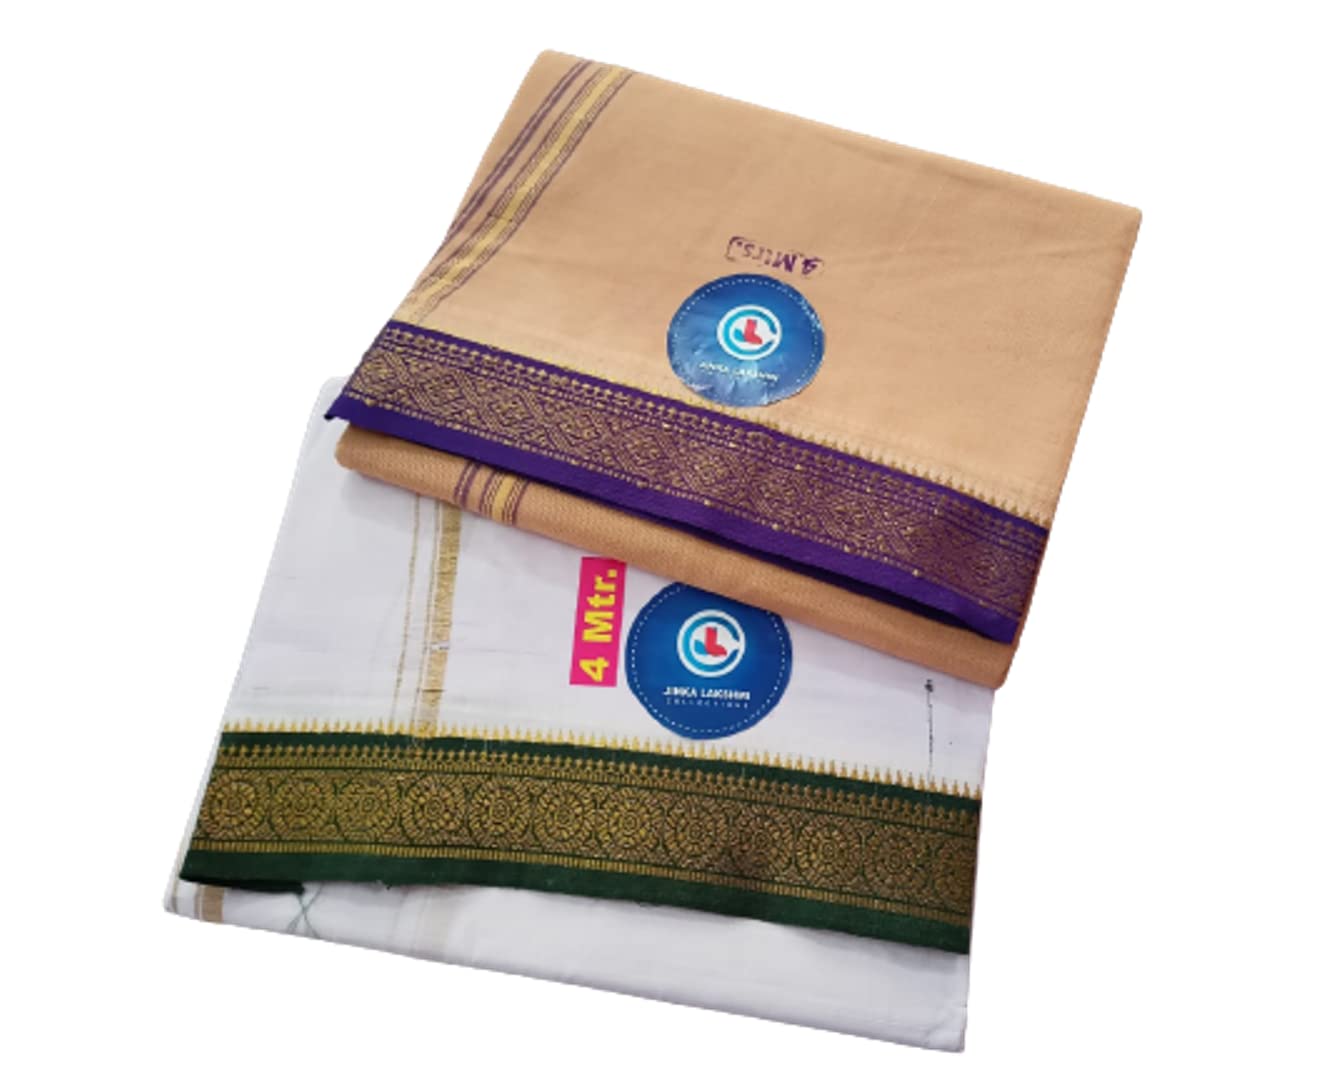 Jinka Lakshmi Collections 100% Handloom Cotton Dhoti With Big Borders 4 Meters Unstitched Pack of 2 (Multicolor-5)